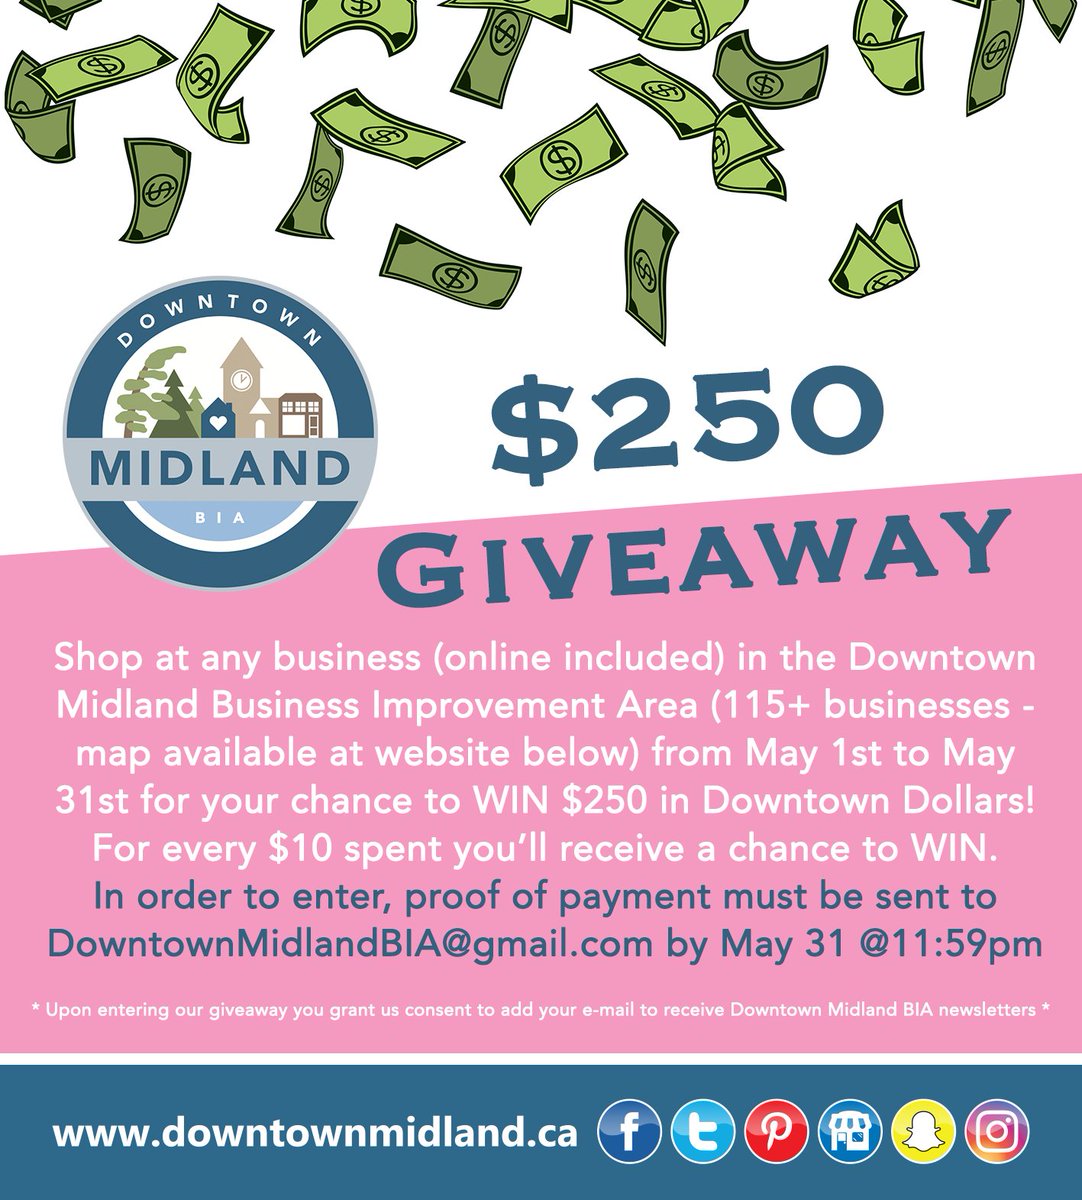 Shop at any business (online included – ex. e-gift card & e-commerce) in the Downtown Midland Business Improvement Area (115+ businesses) from May 1st - May 31st for your chance to WIN $250 in Downtown Dollars! downtownmidland.ca/events BUSINESS OPERATIONS: downtownmidland.ca